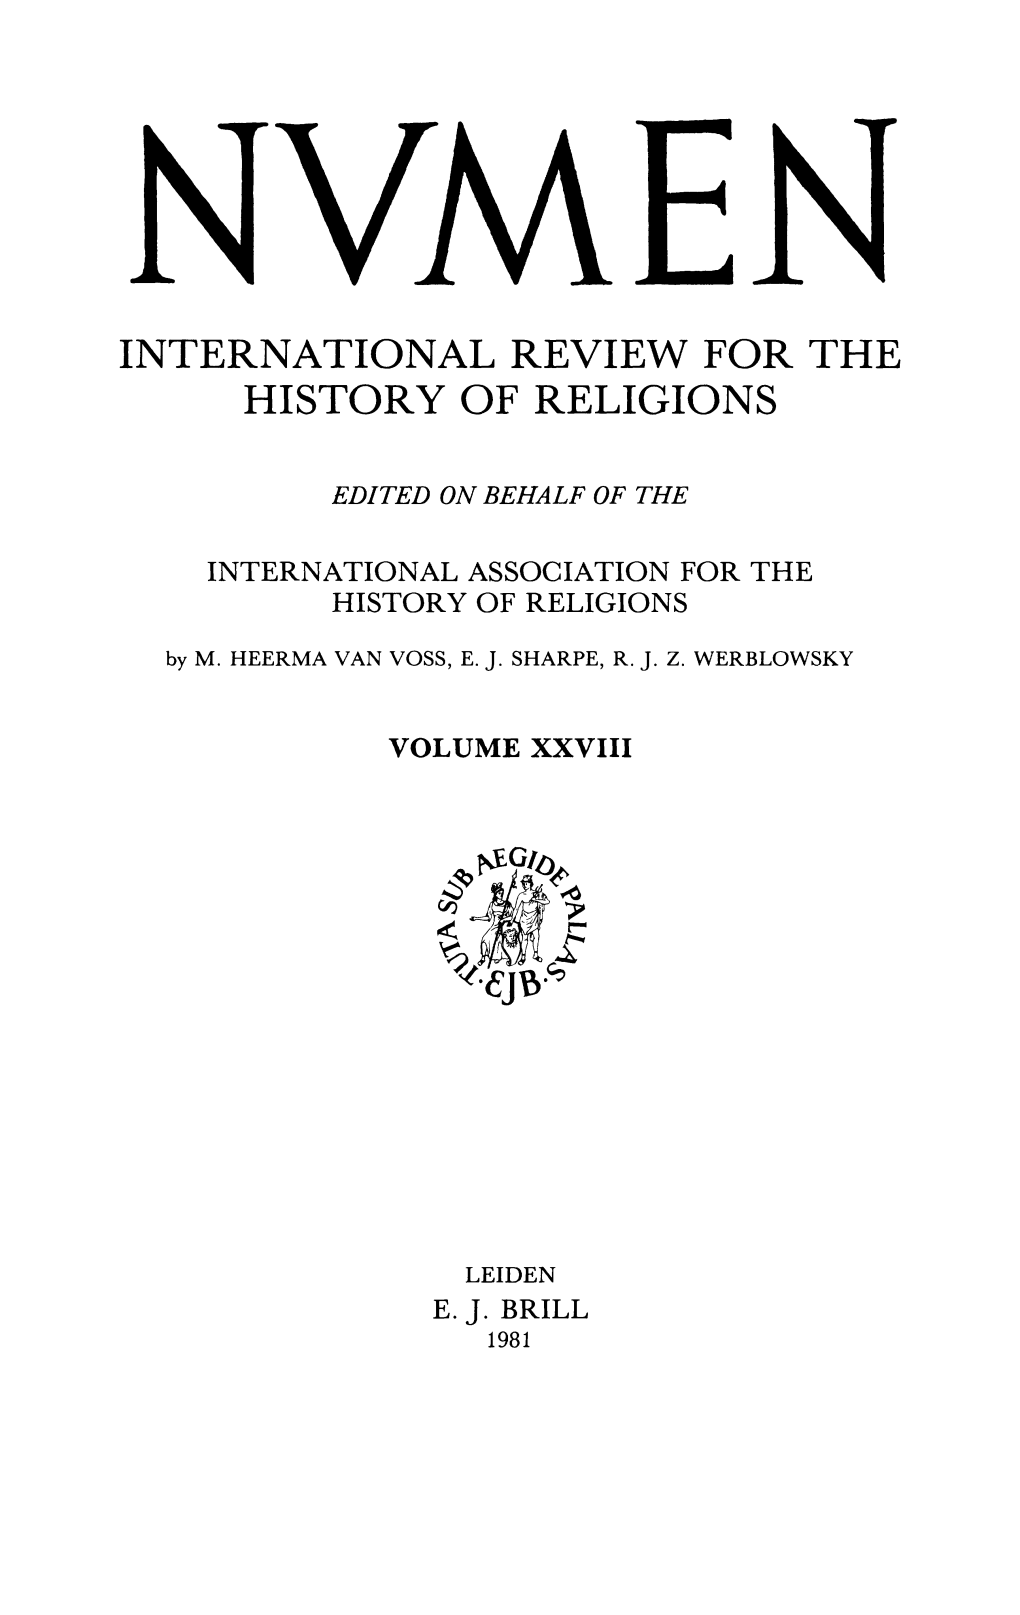 International Review for the History of Religions